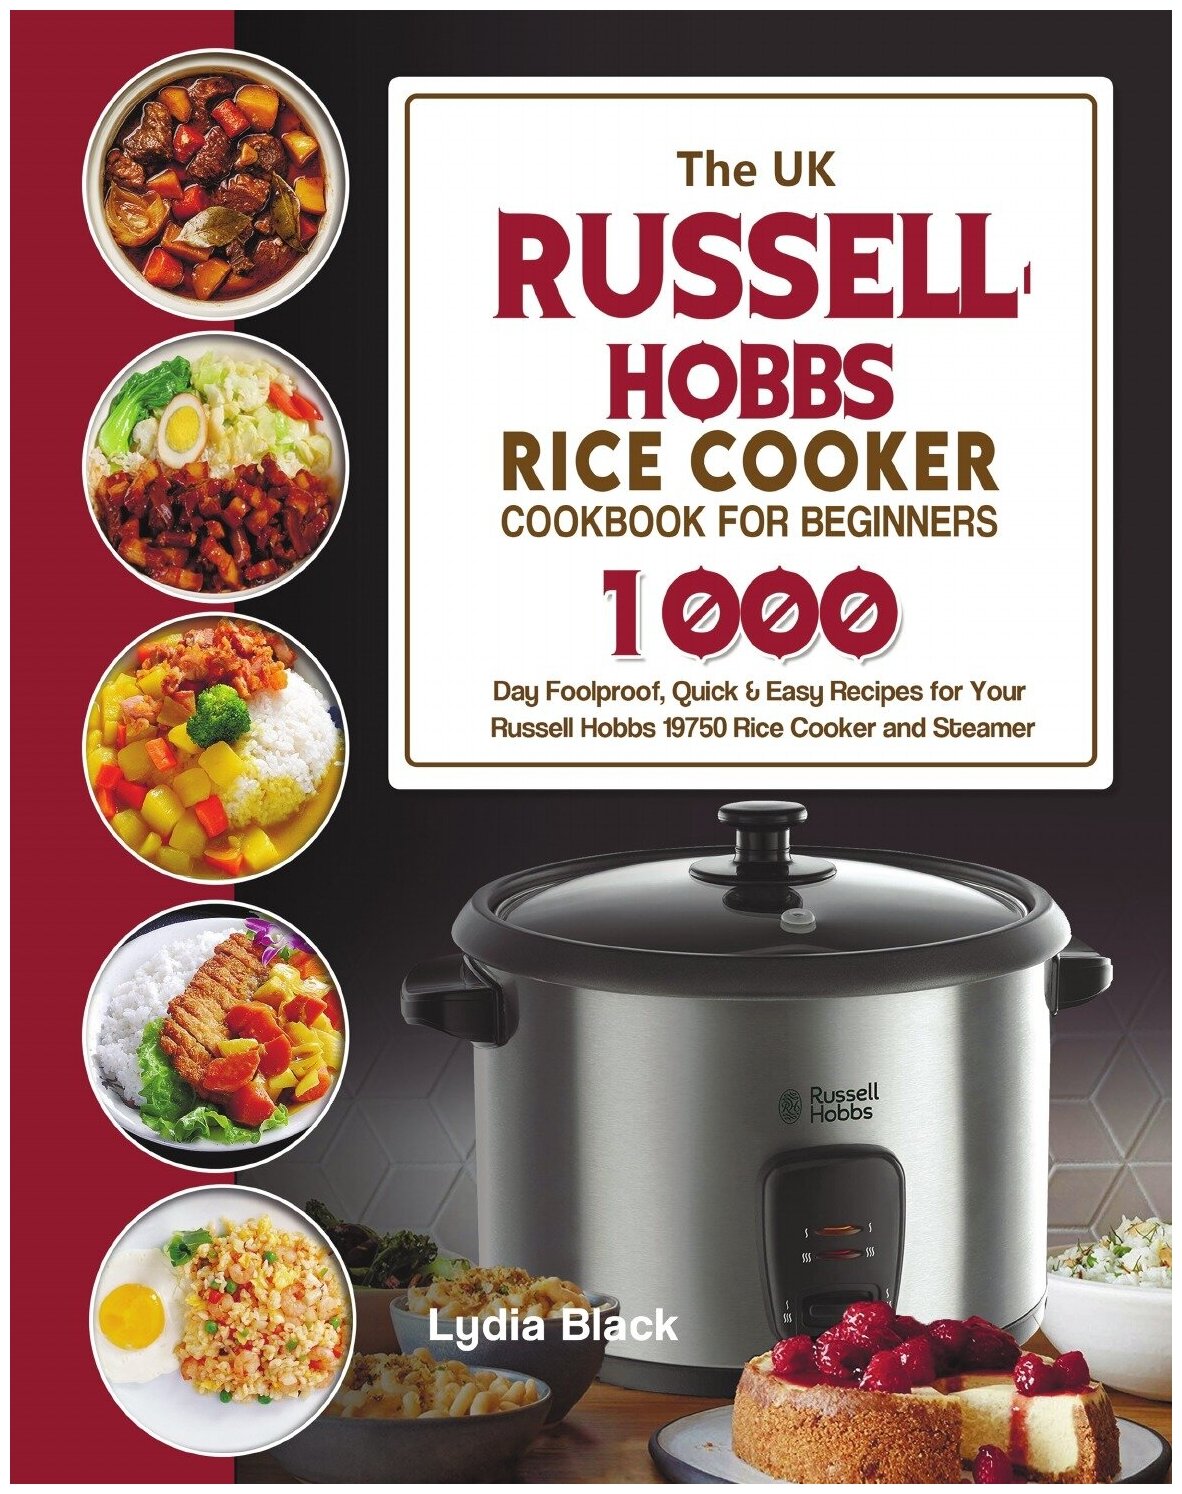 The UK Russell Hobbs Rice CookerCookbook For Beginners. 1000-Day Foolproof, Quick & Easy Recipes for Your Russell Hobbs 19750 Rice Cooker and Steamer